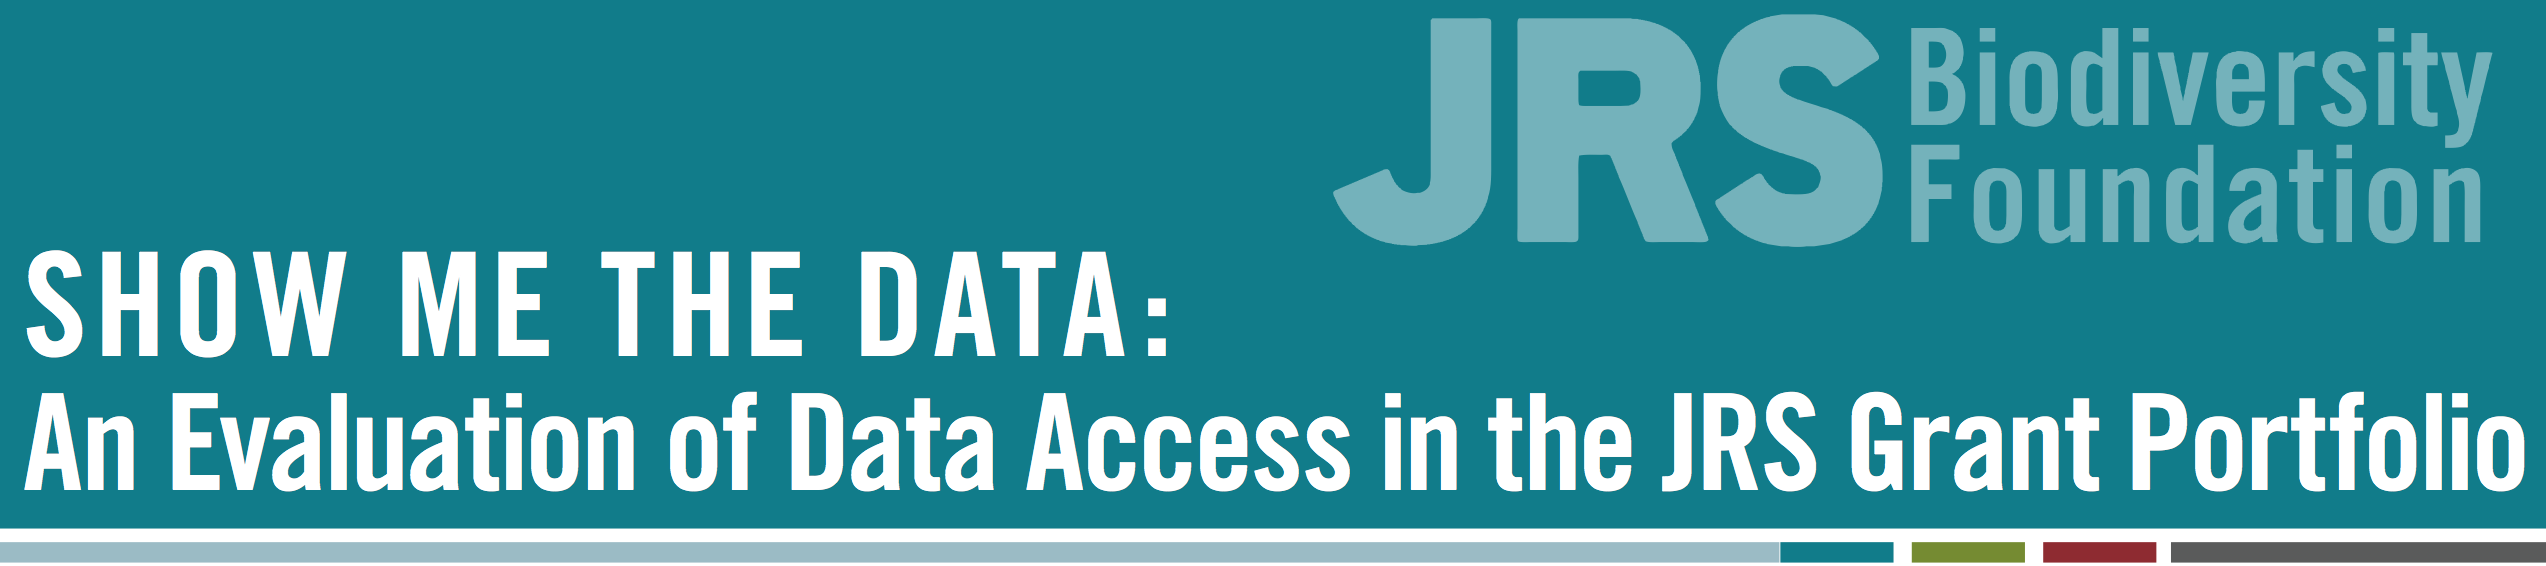 Show me the Data JRS Report on Access to Biodiversity Data in our